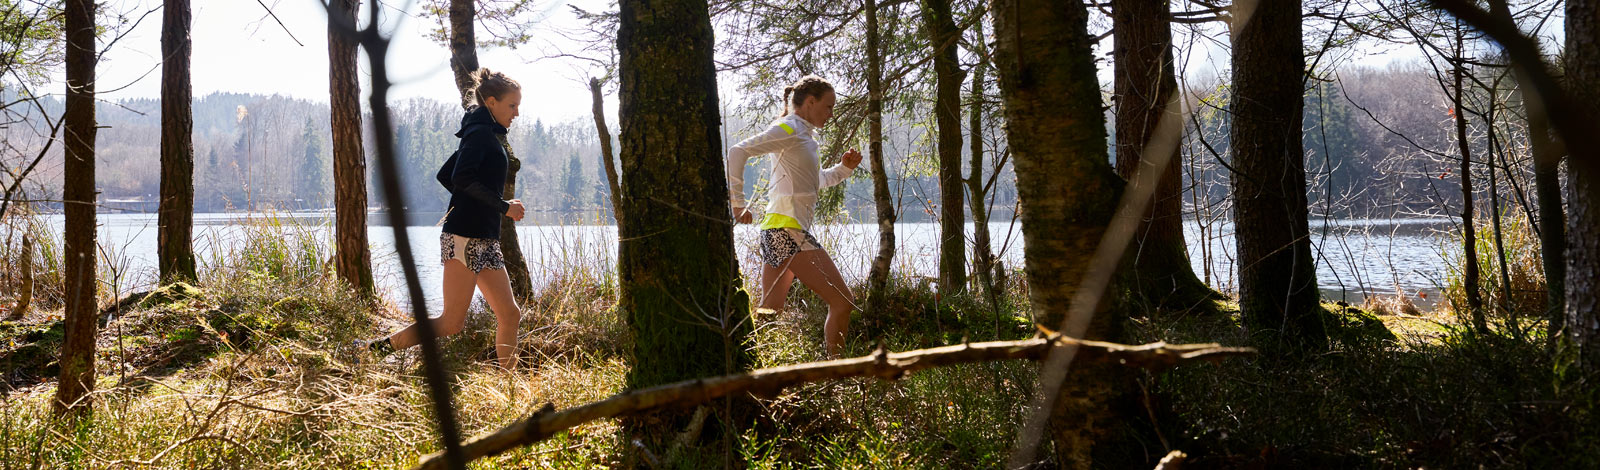 Two runners run behind trees and in front of a small lake in a row over a forest path